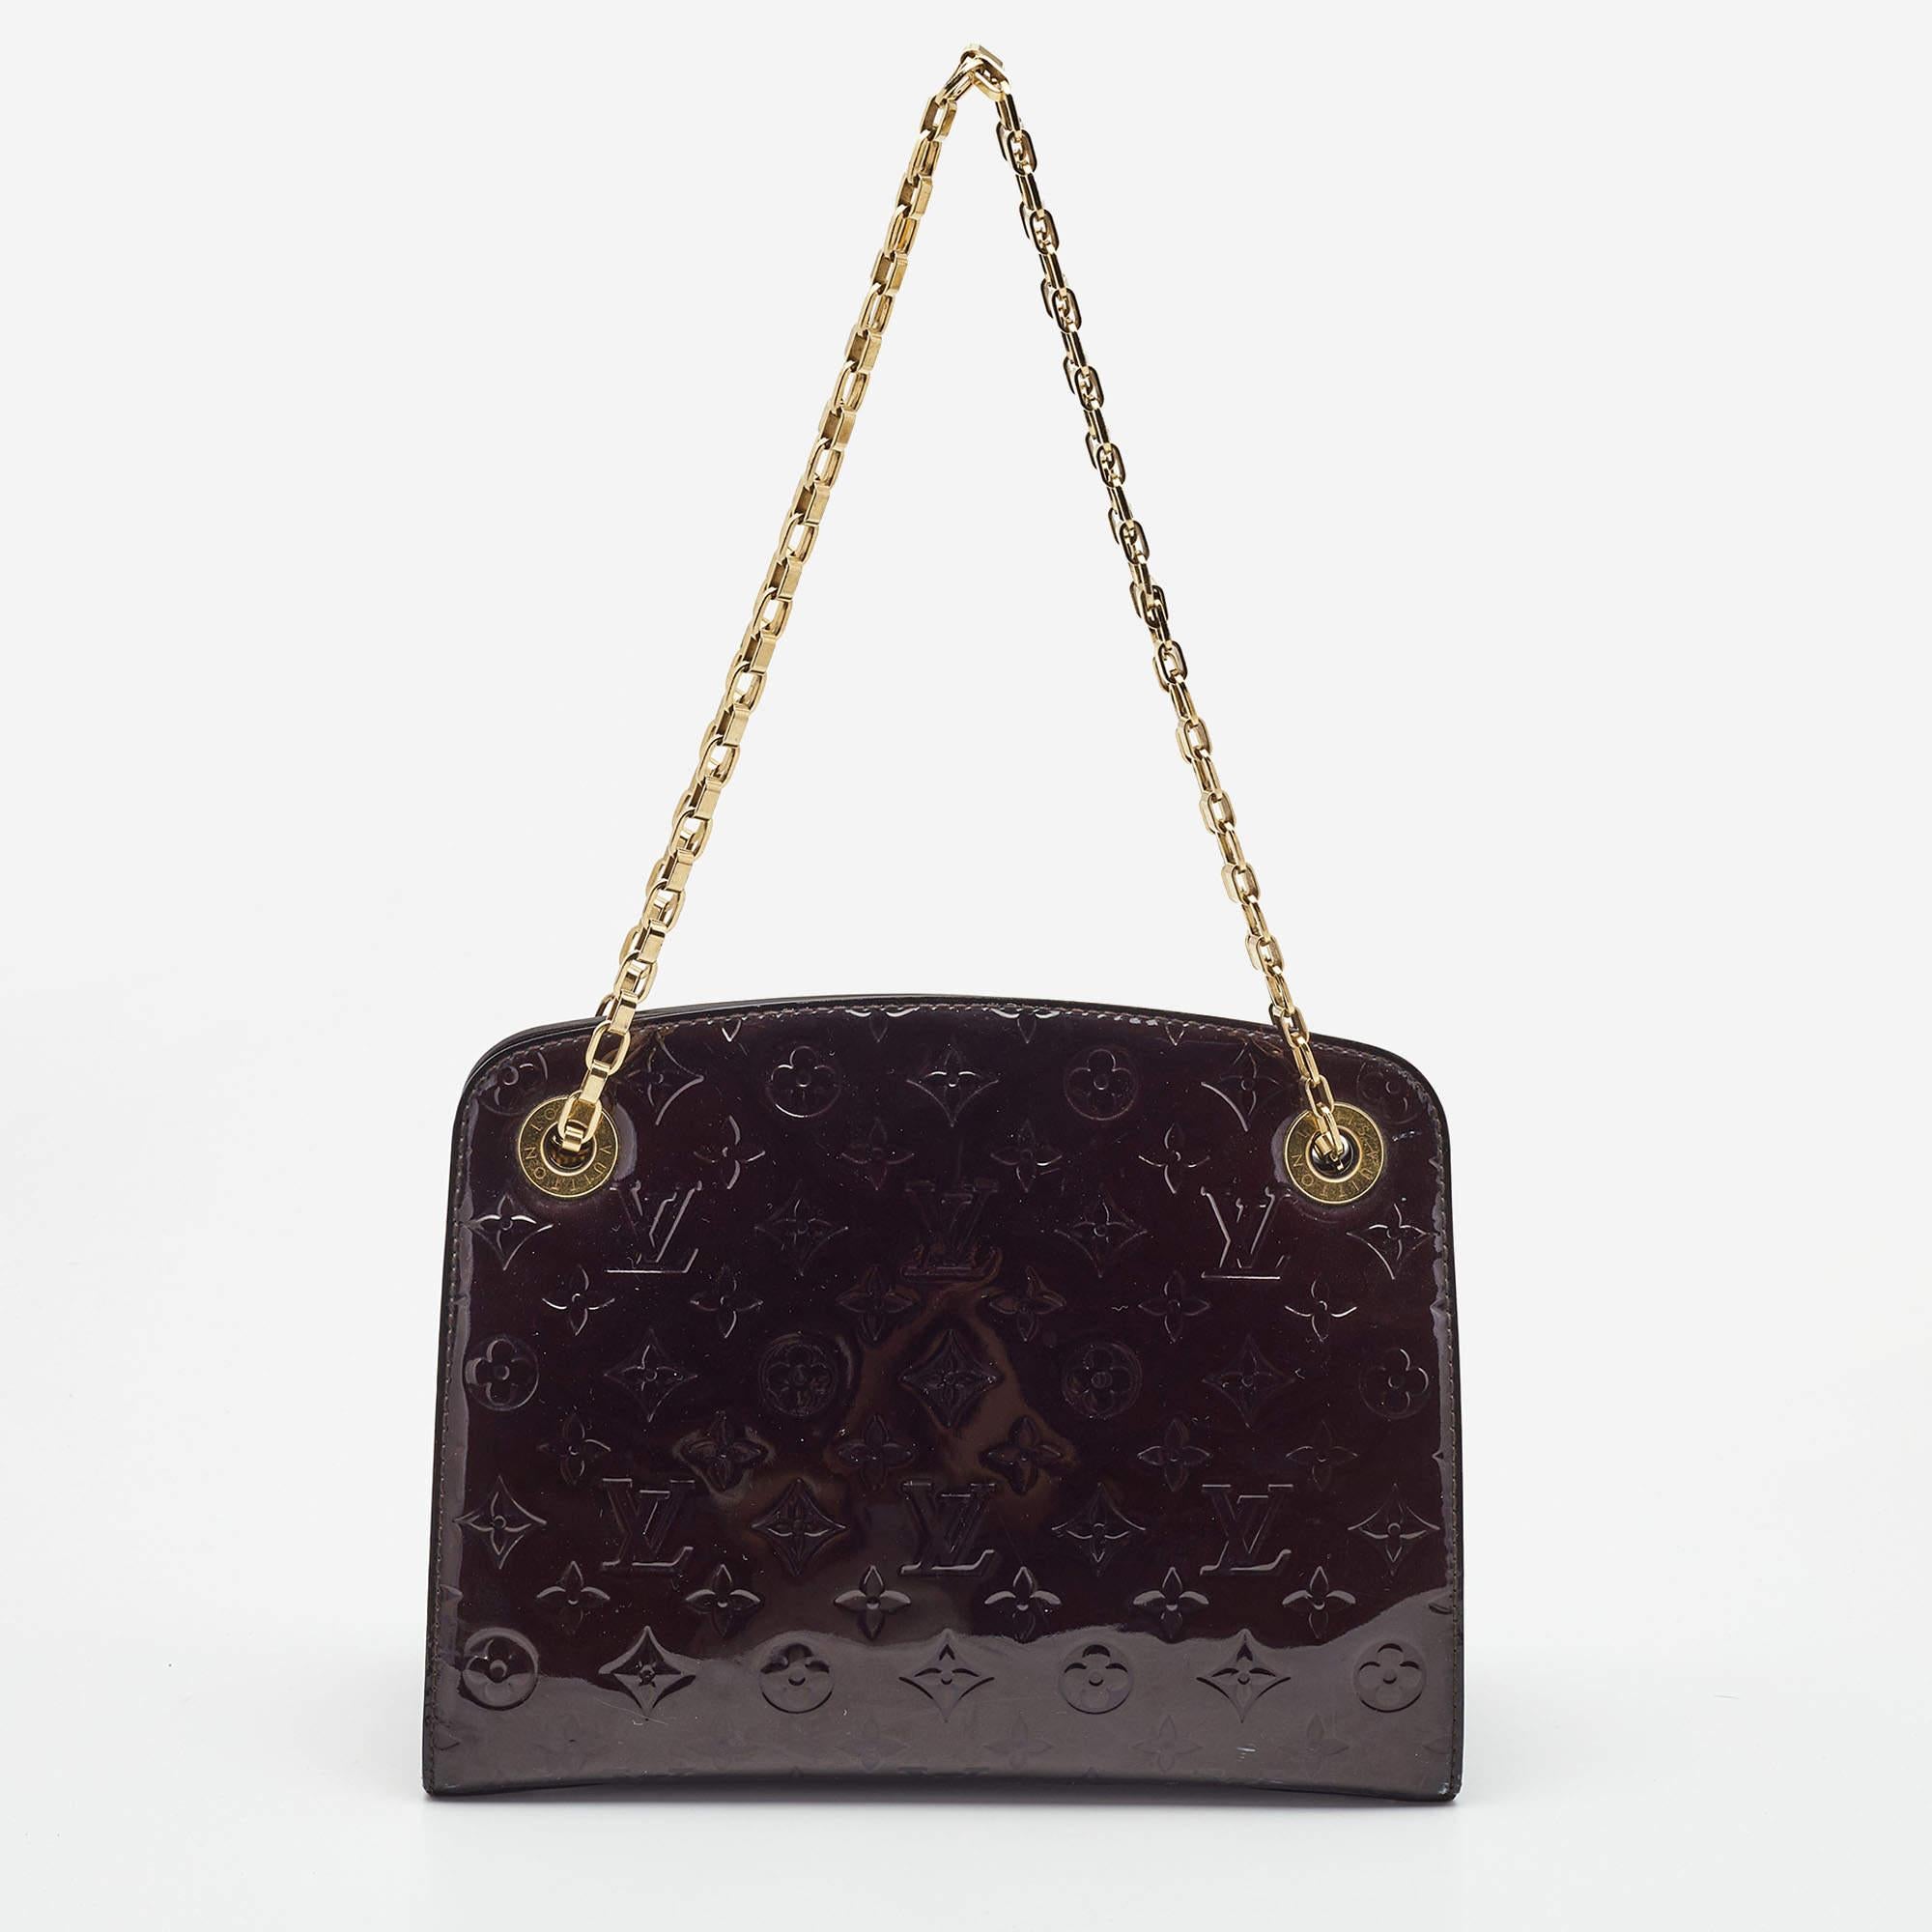 Perfect for conveniently housing your essentials in one place, this Louis Vuitton Virginia MM bag is a worthy investment. It has notable details and offers a look of luxury.

